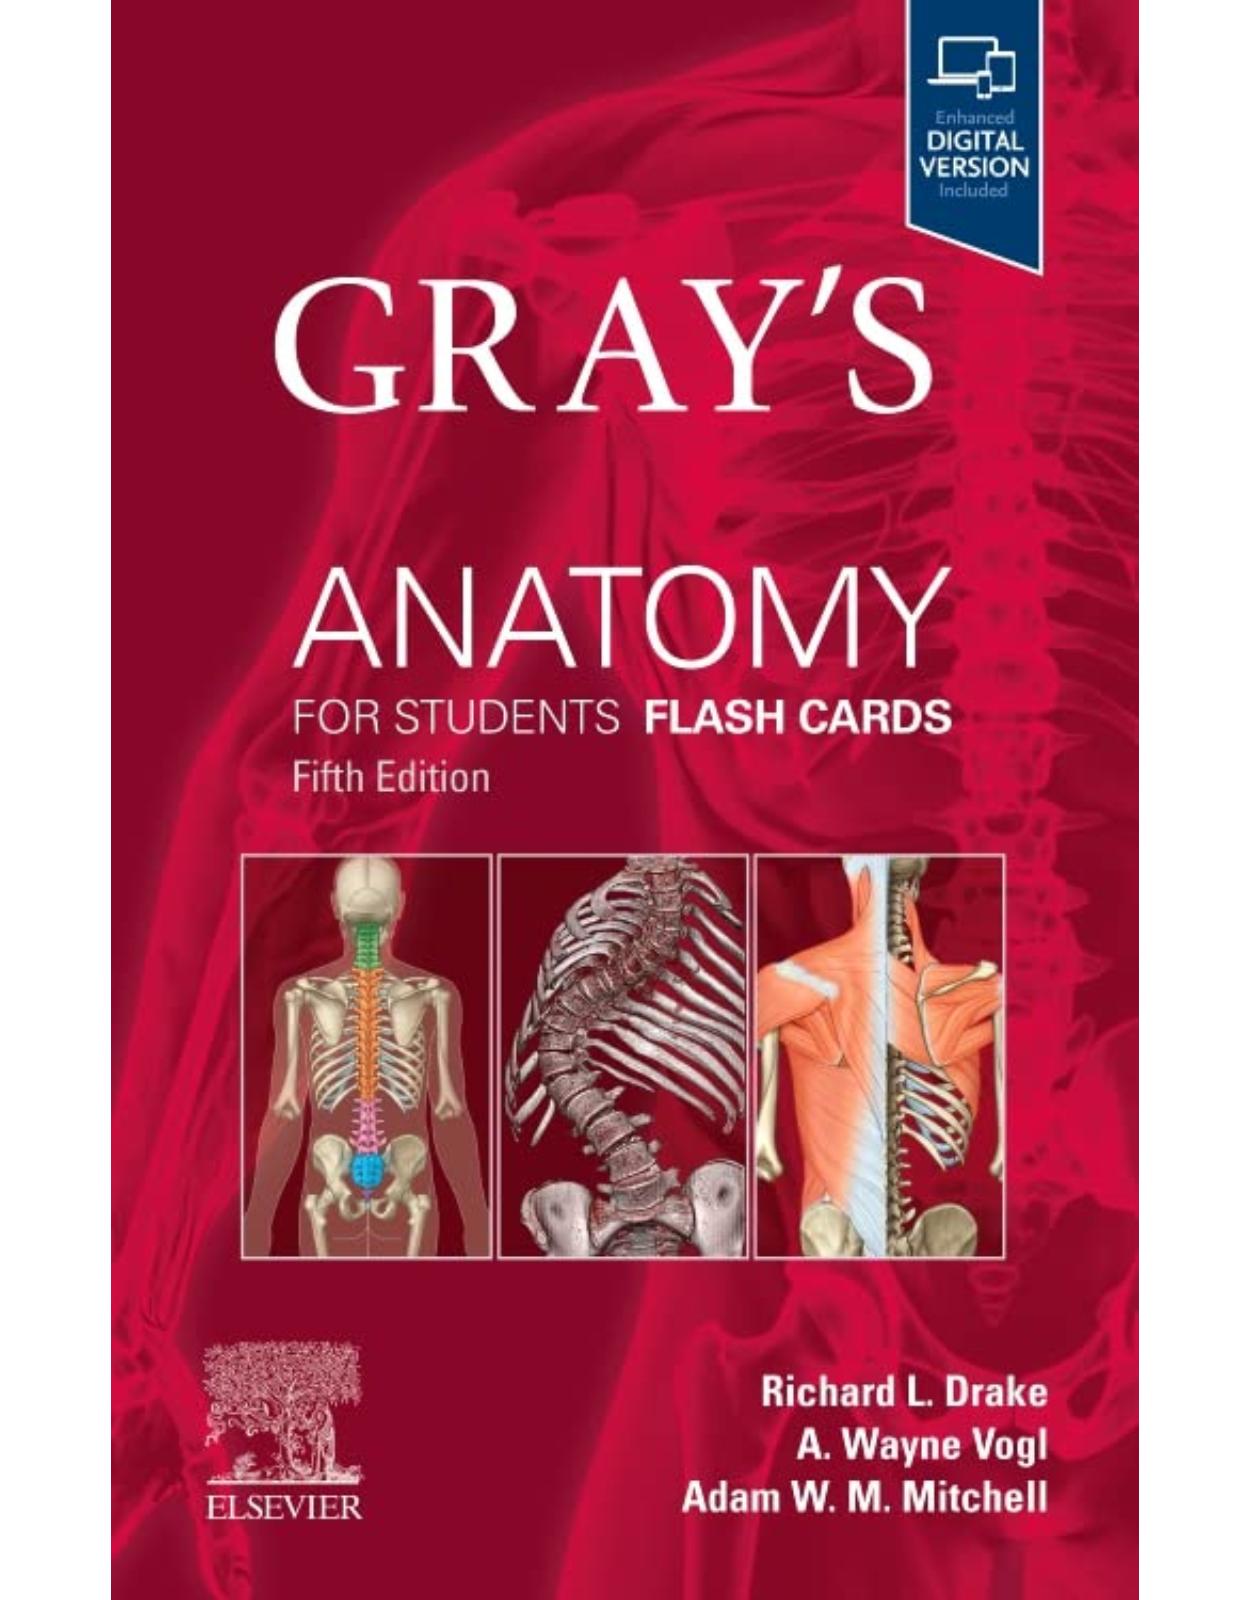 Gray’s Anatomy for Students Flash Cards